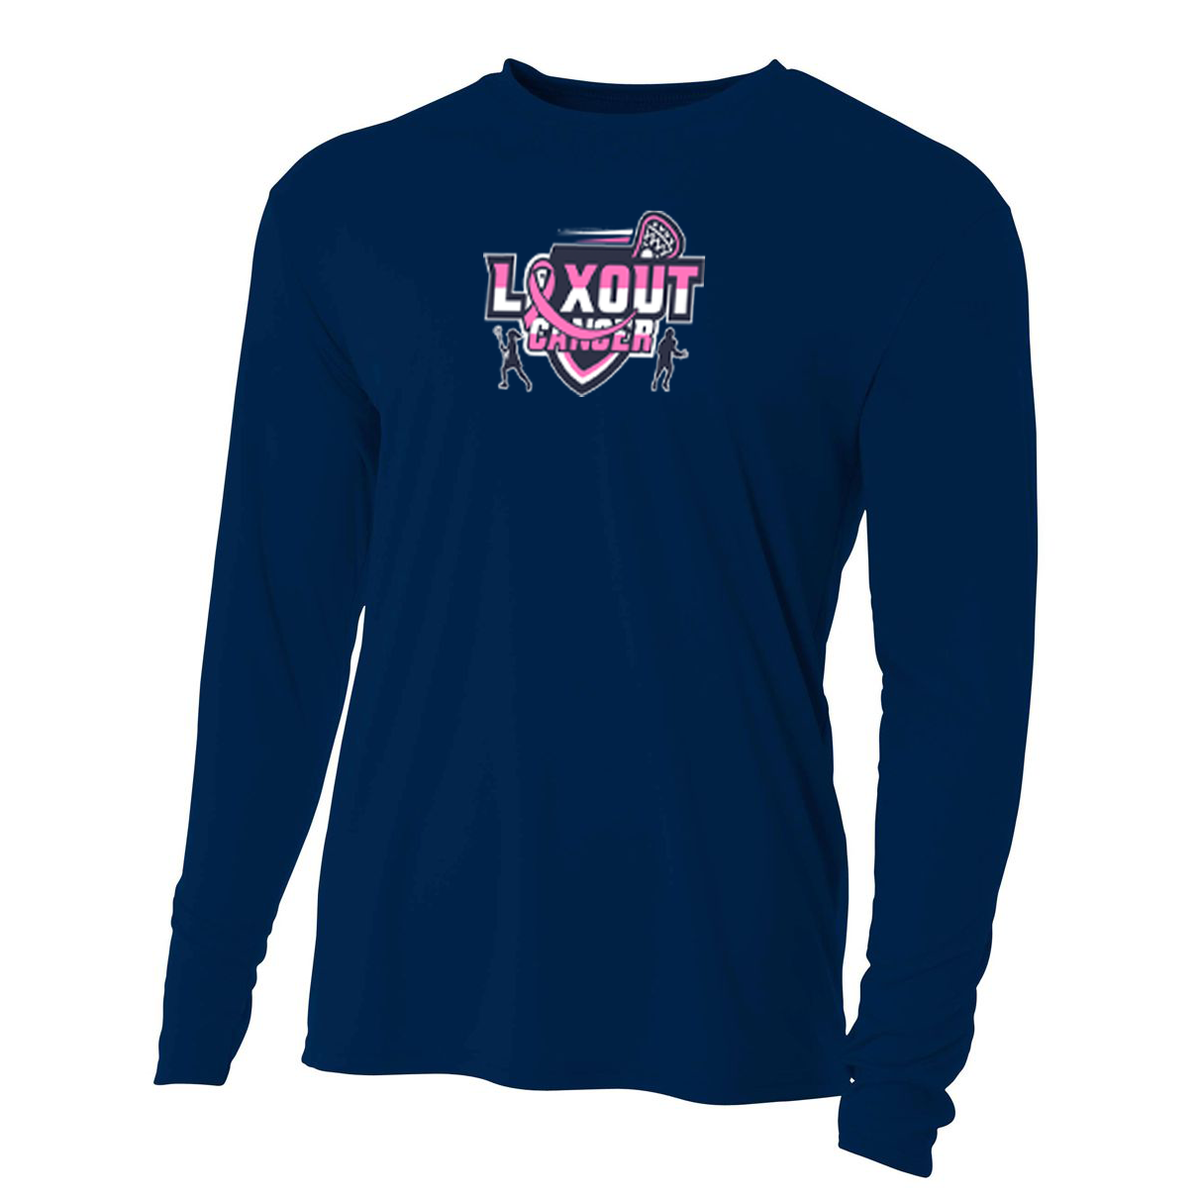 LaxOut Cancer Cooling Performance Long Sleeve Crew